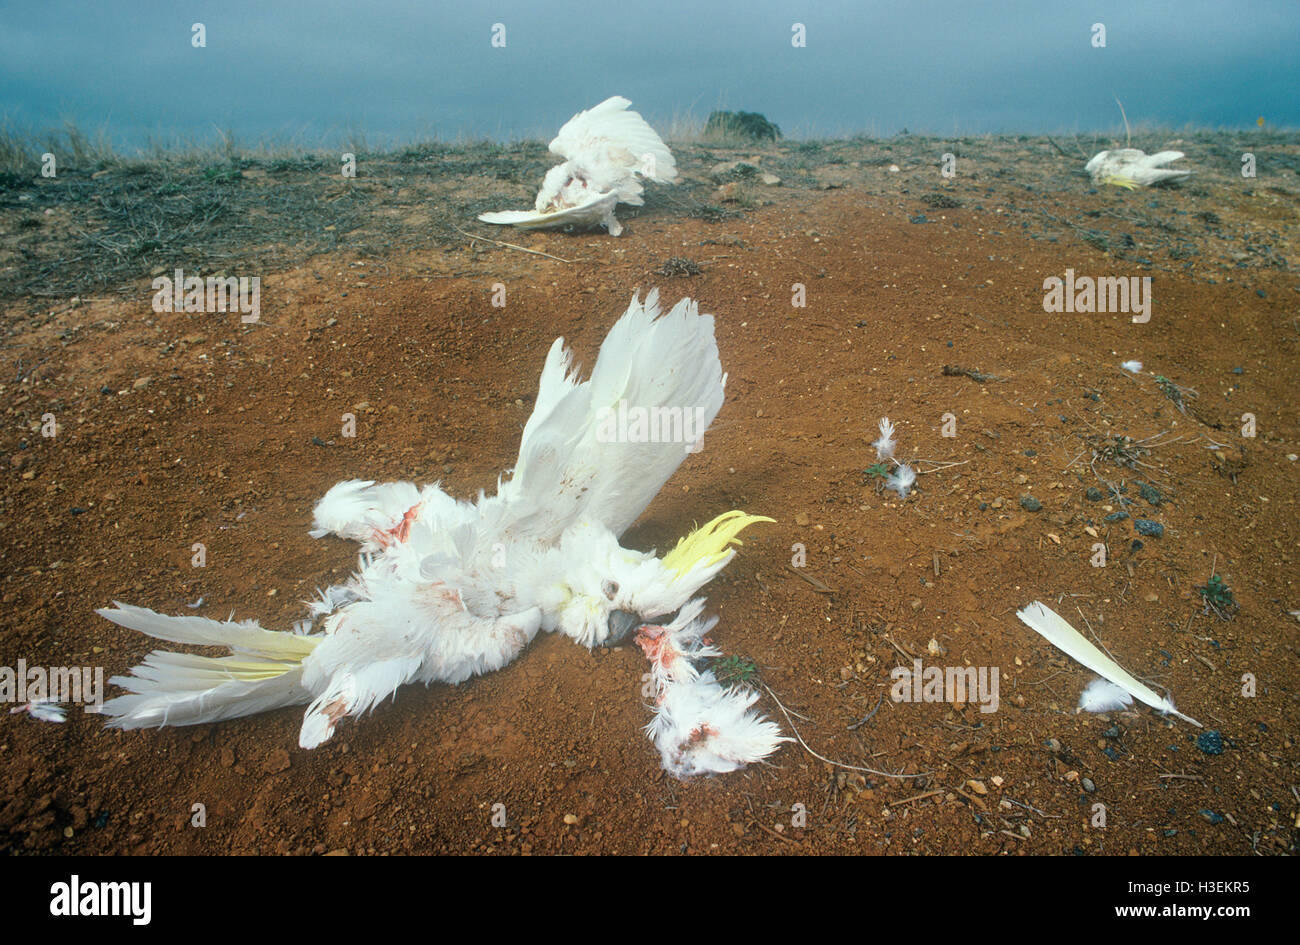 Sulphur-crested white cockatoos (Cacatua galerita), dead birds poisoned by farmers and eaten by feral cats. Australia Stock Photo